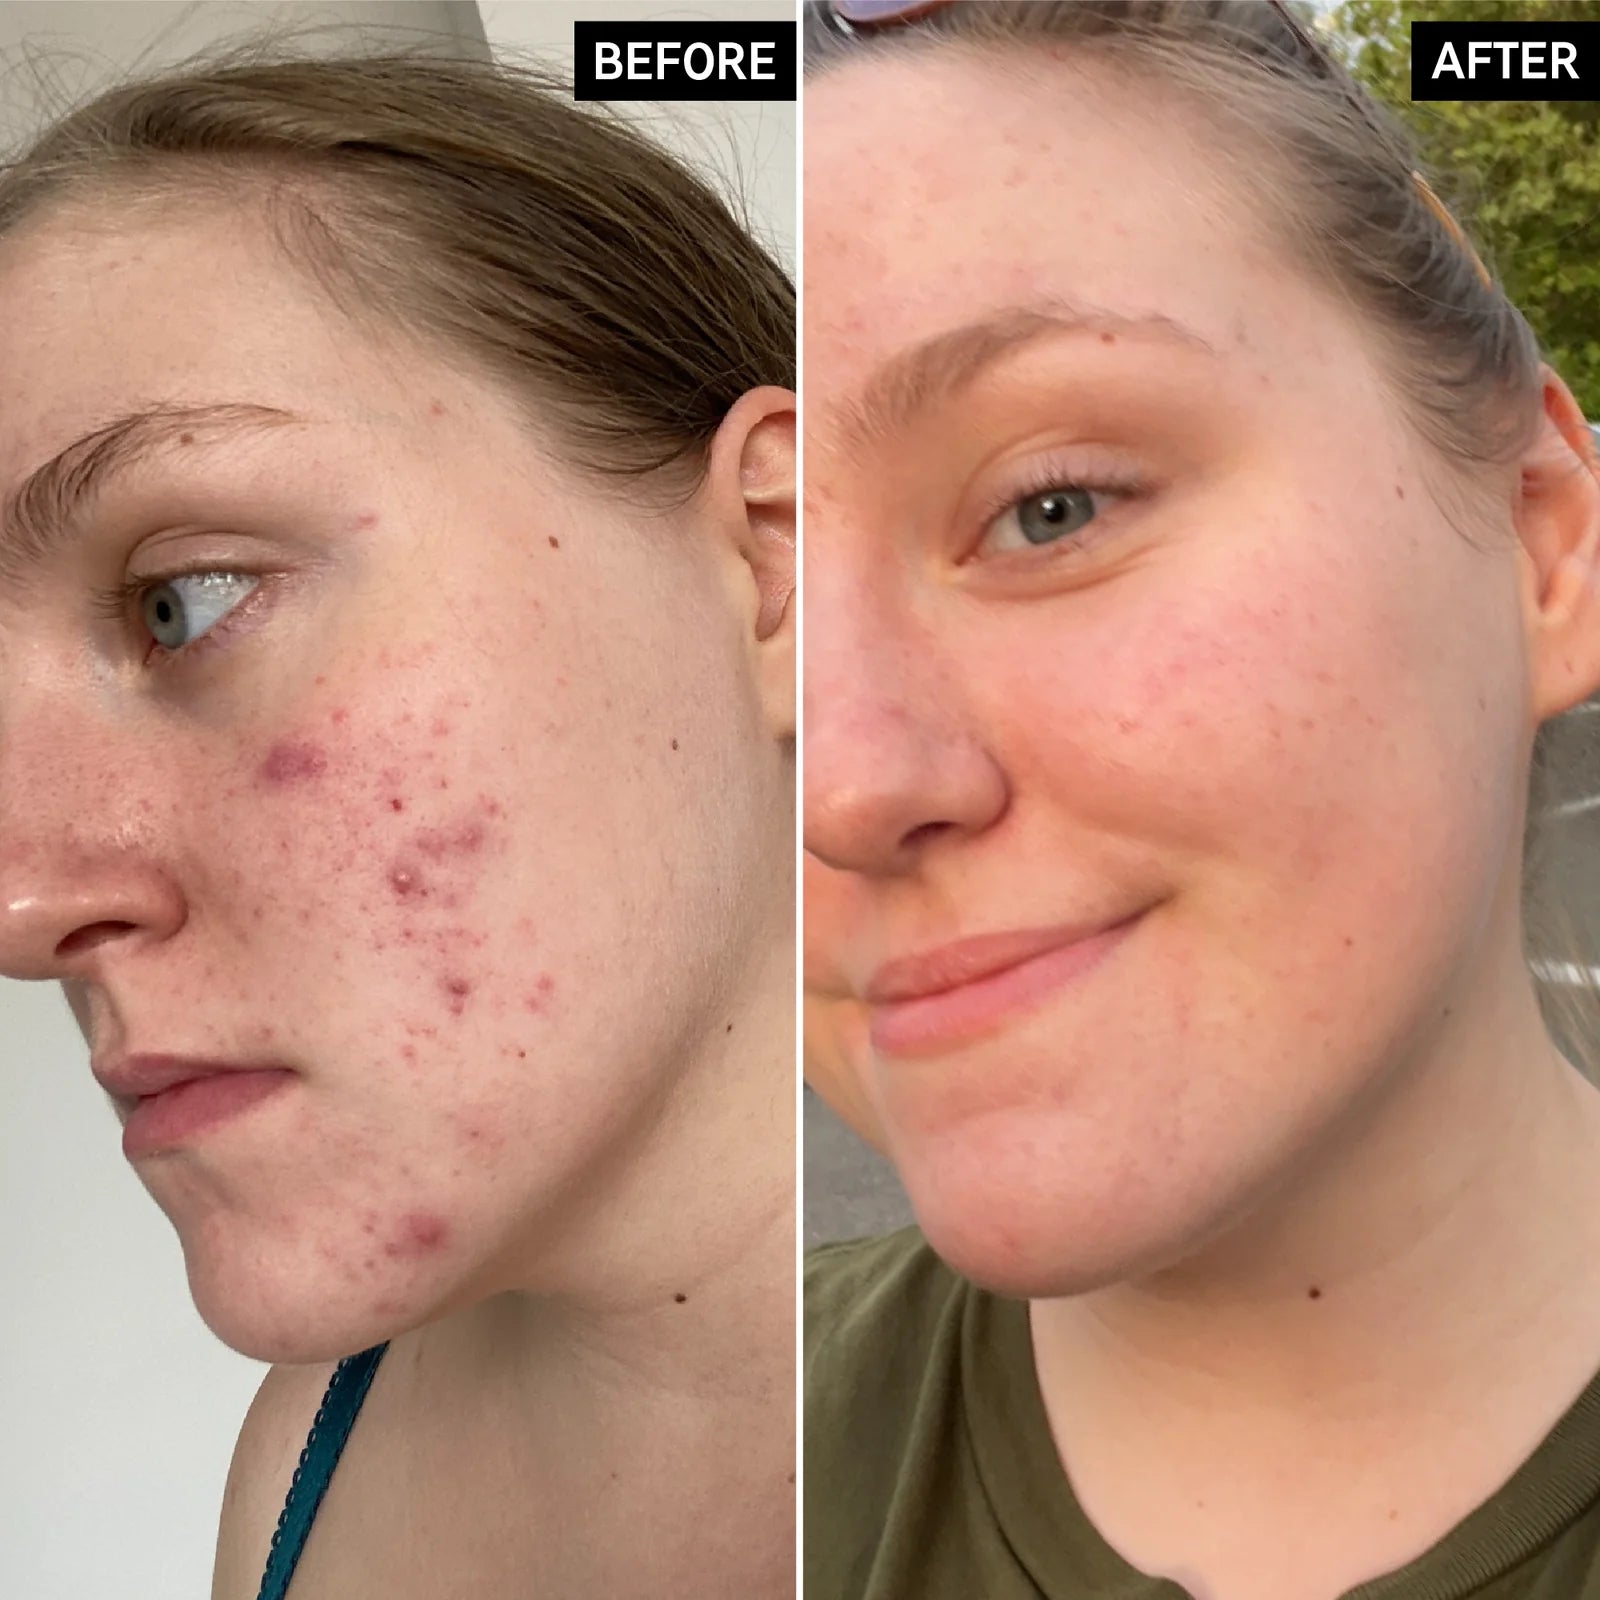 image showing before and after of using glycolic acid toner for open pores, fine lines and blackheads available at Heygirl.pk for delivery in Pakistan